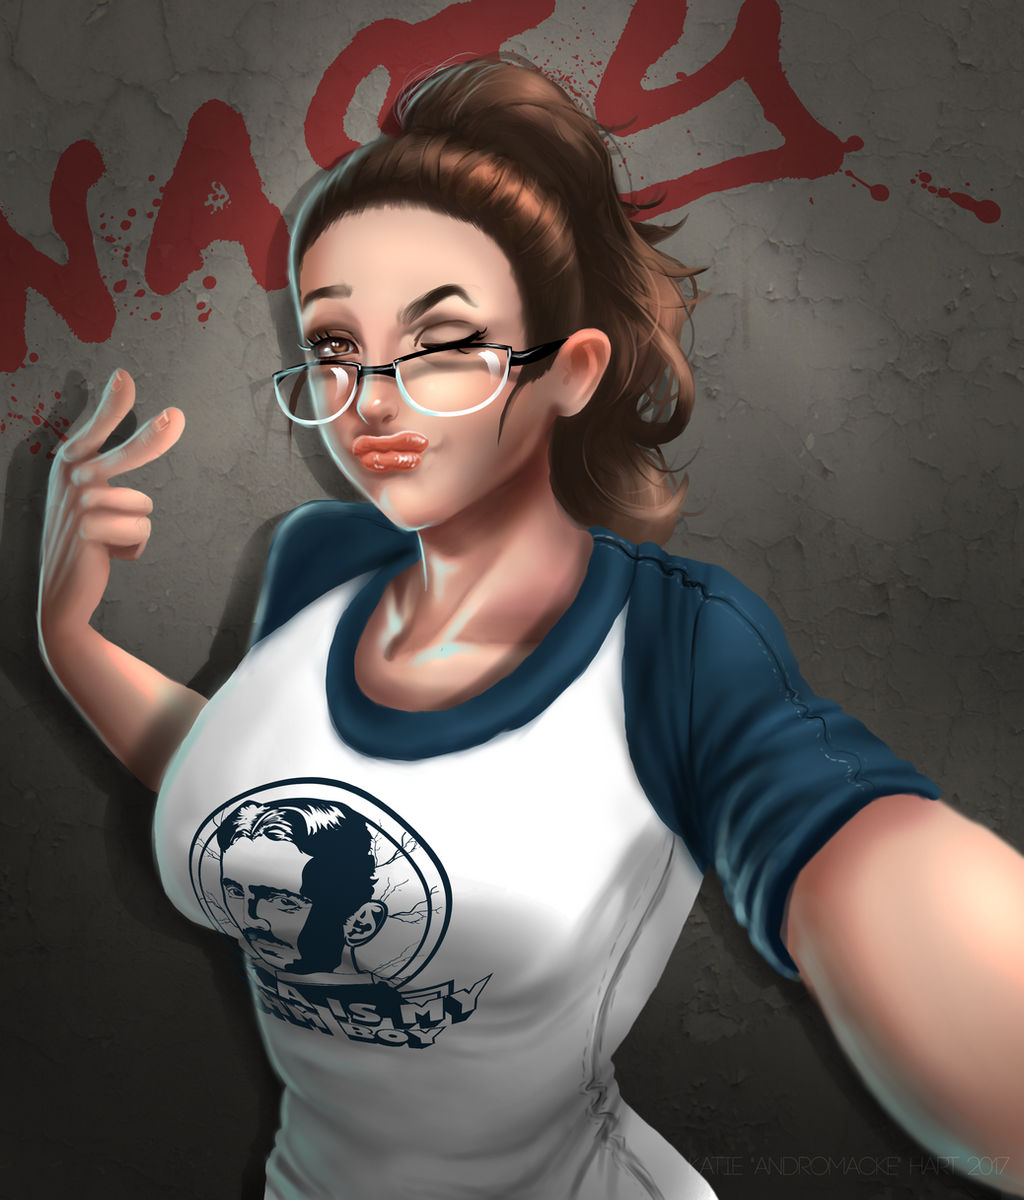 Nasty Woman With Duck Lips Selfie By Andromacke On Deviantart